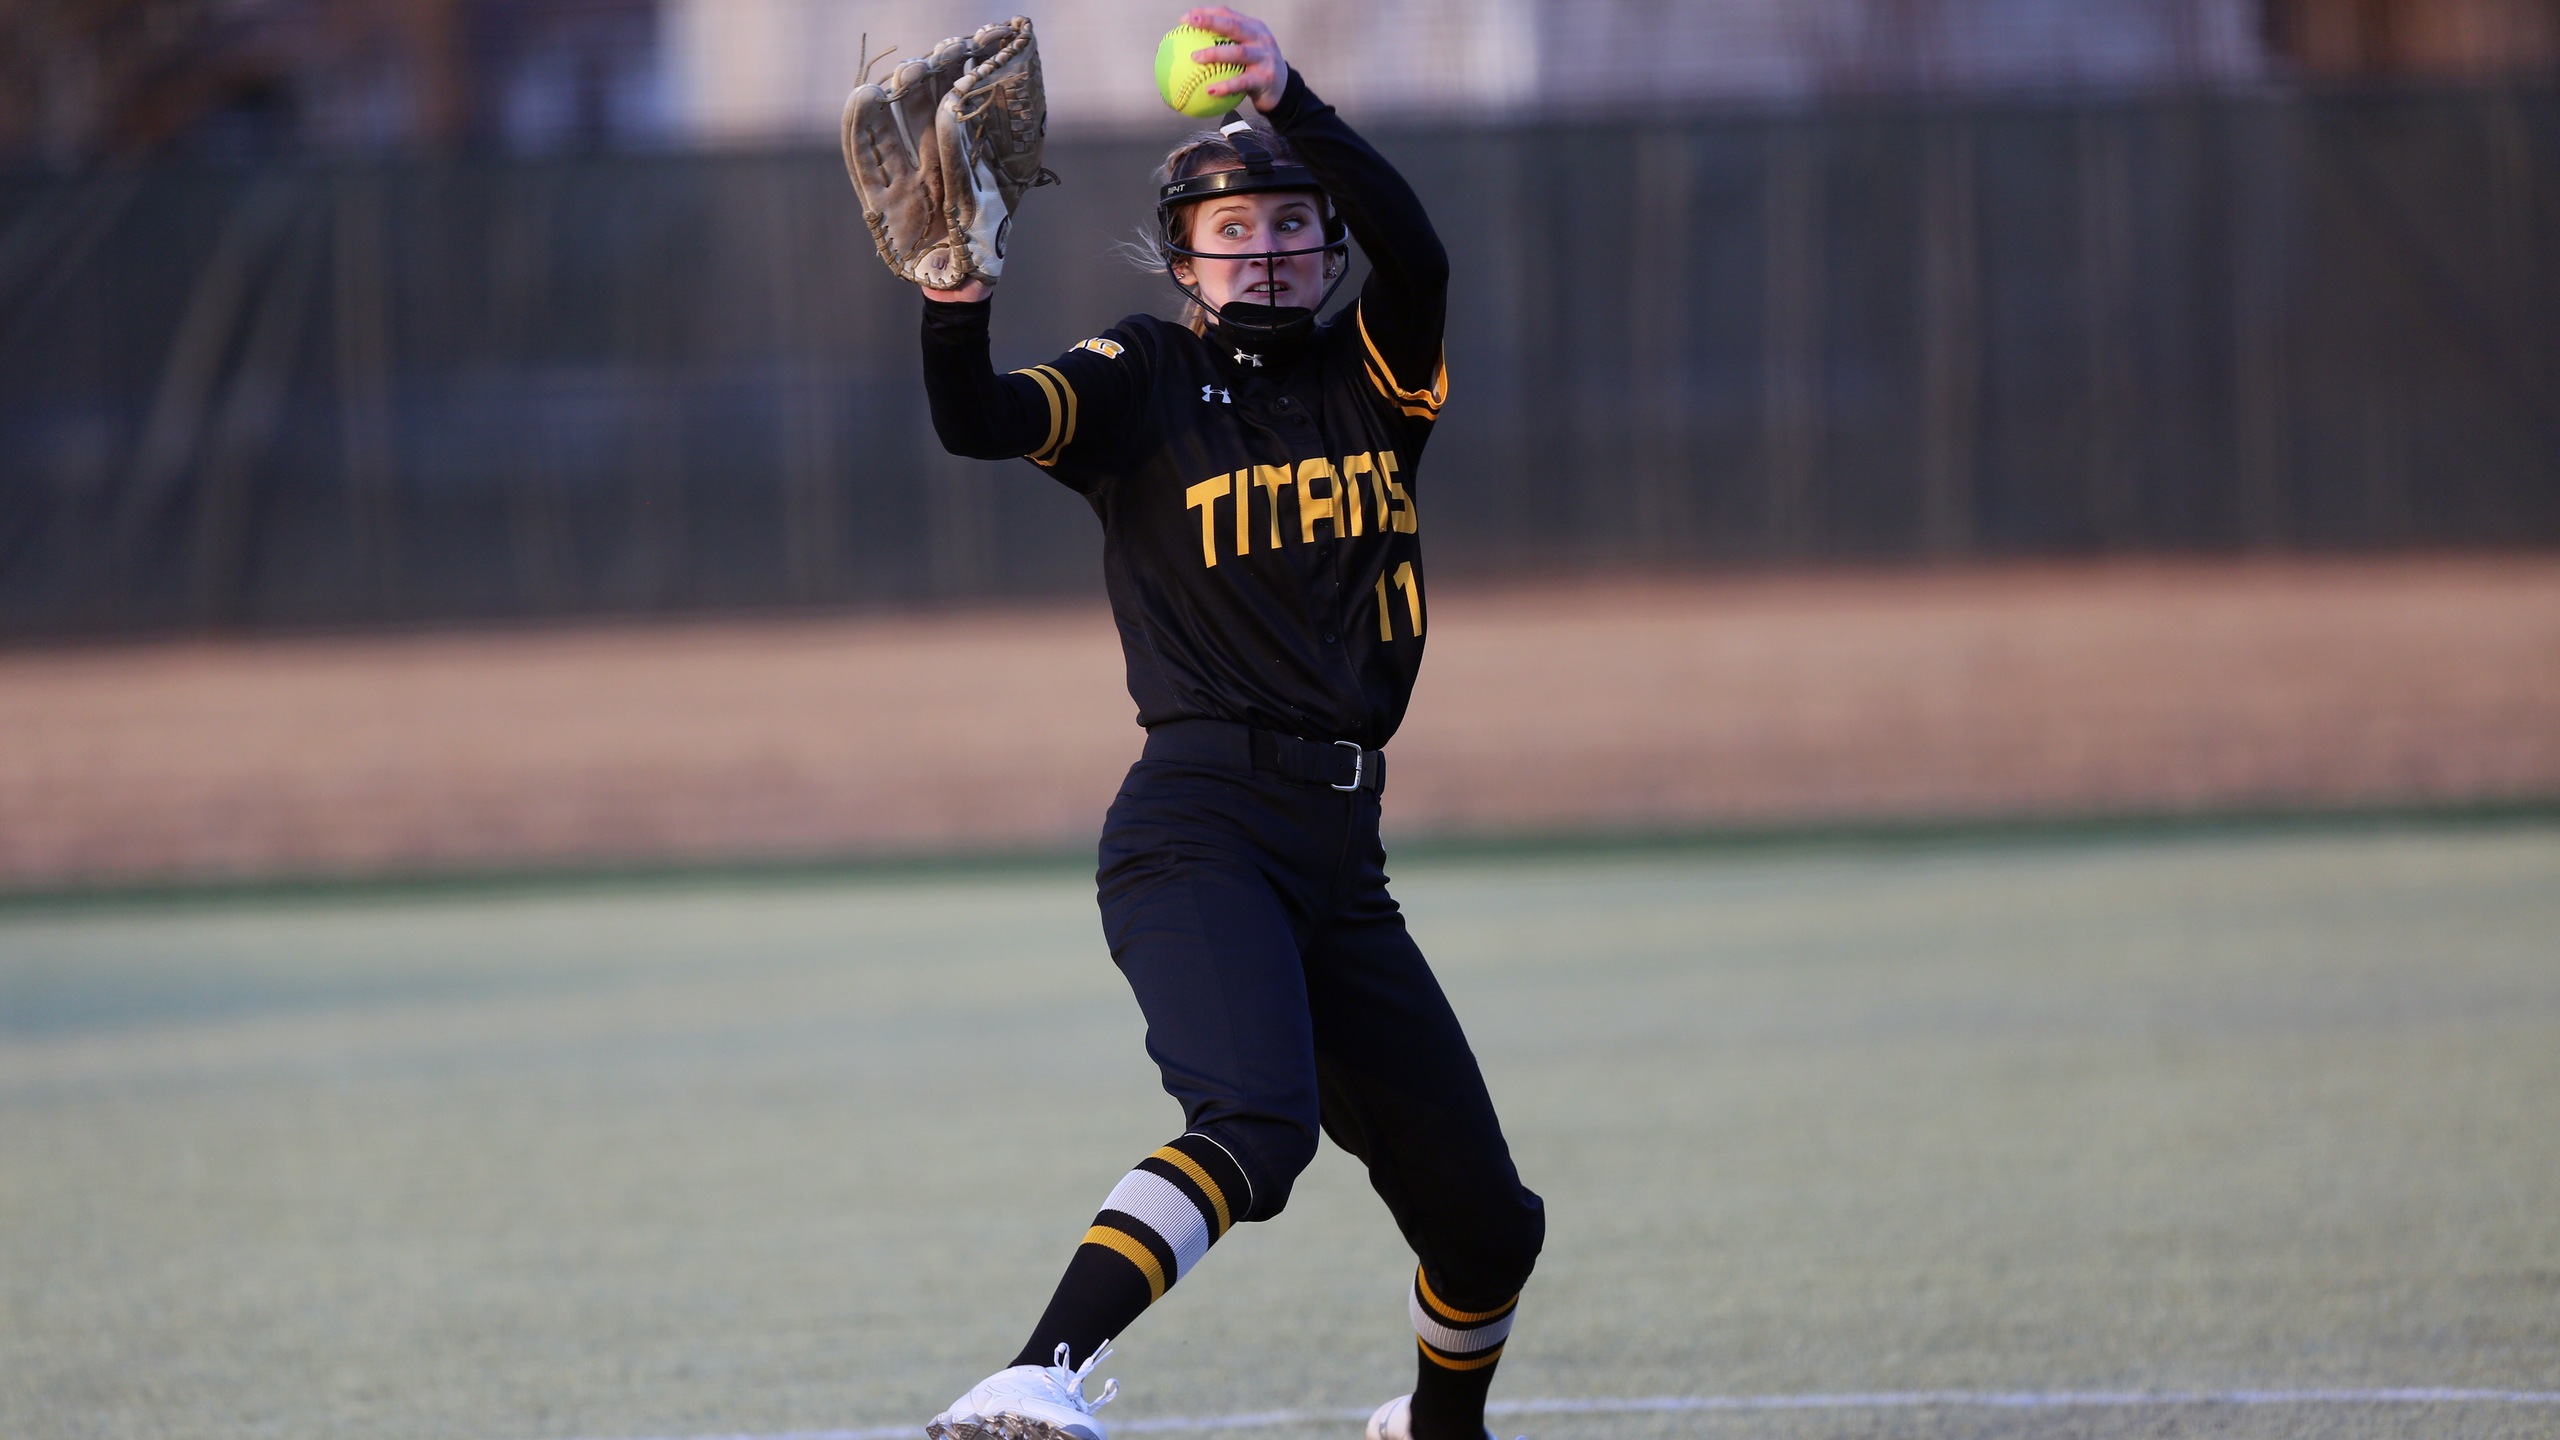 Freshman Mia Crotty pitched a five-hit shutout with two strikeouts in first career start.